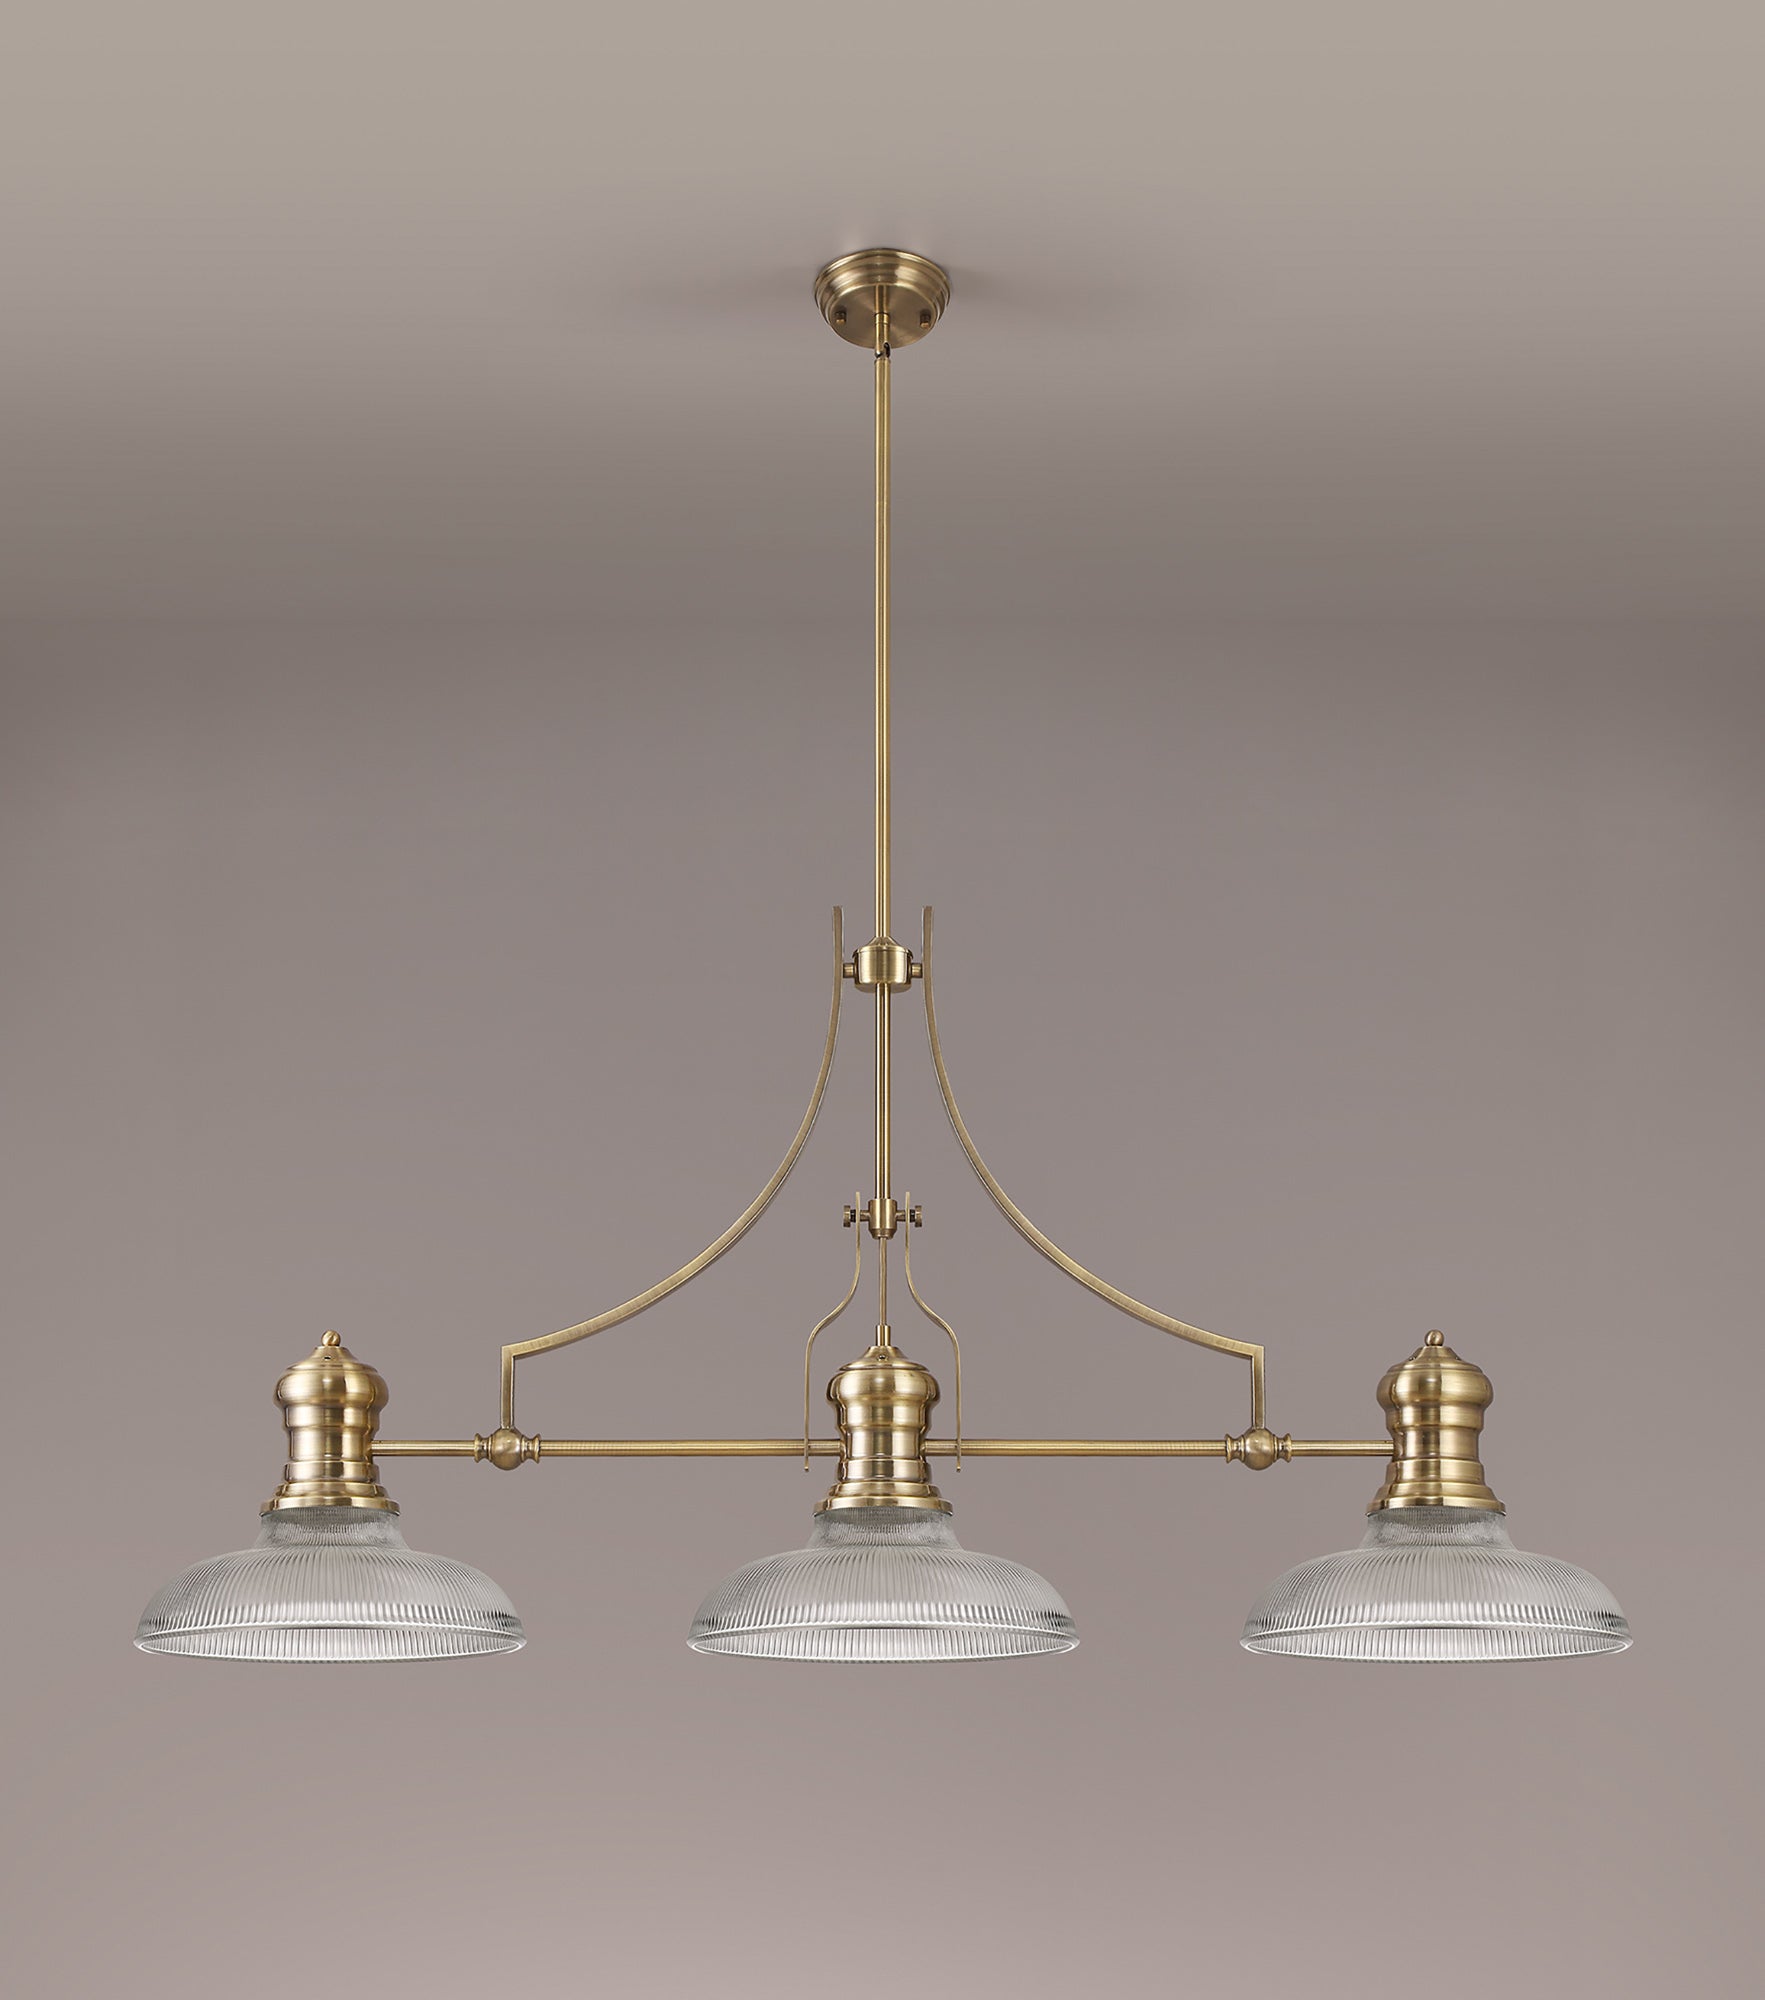 Docker 3 Light Linear Pendant E27 With 30cm Round Glass Shade, Antique Brass, Clear